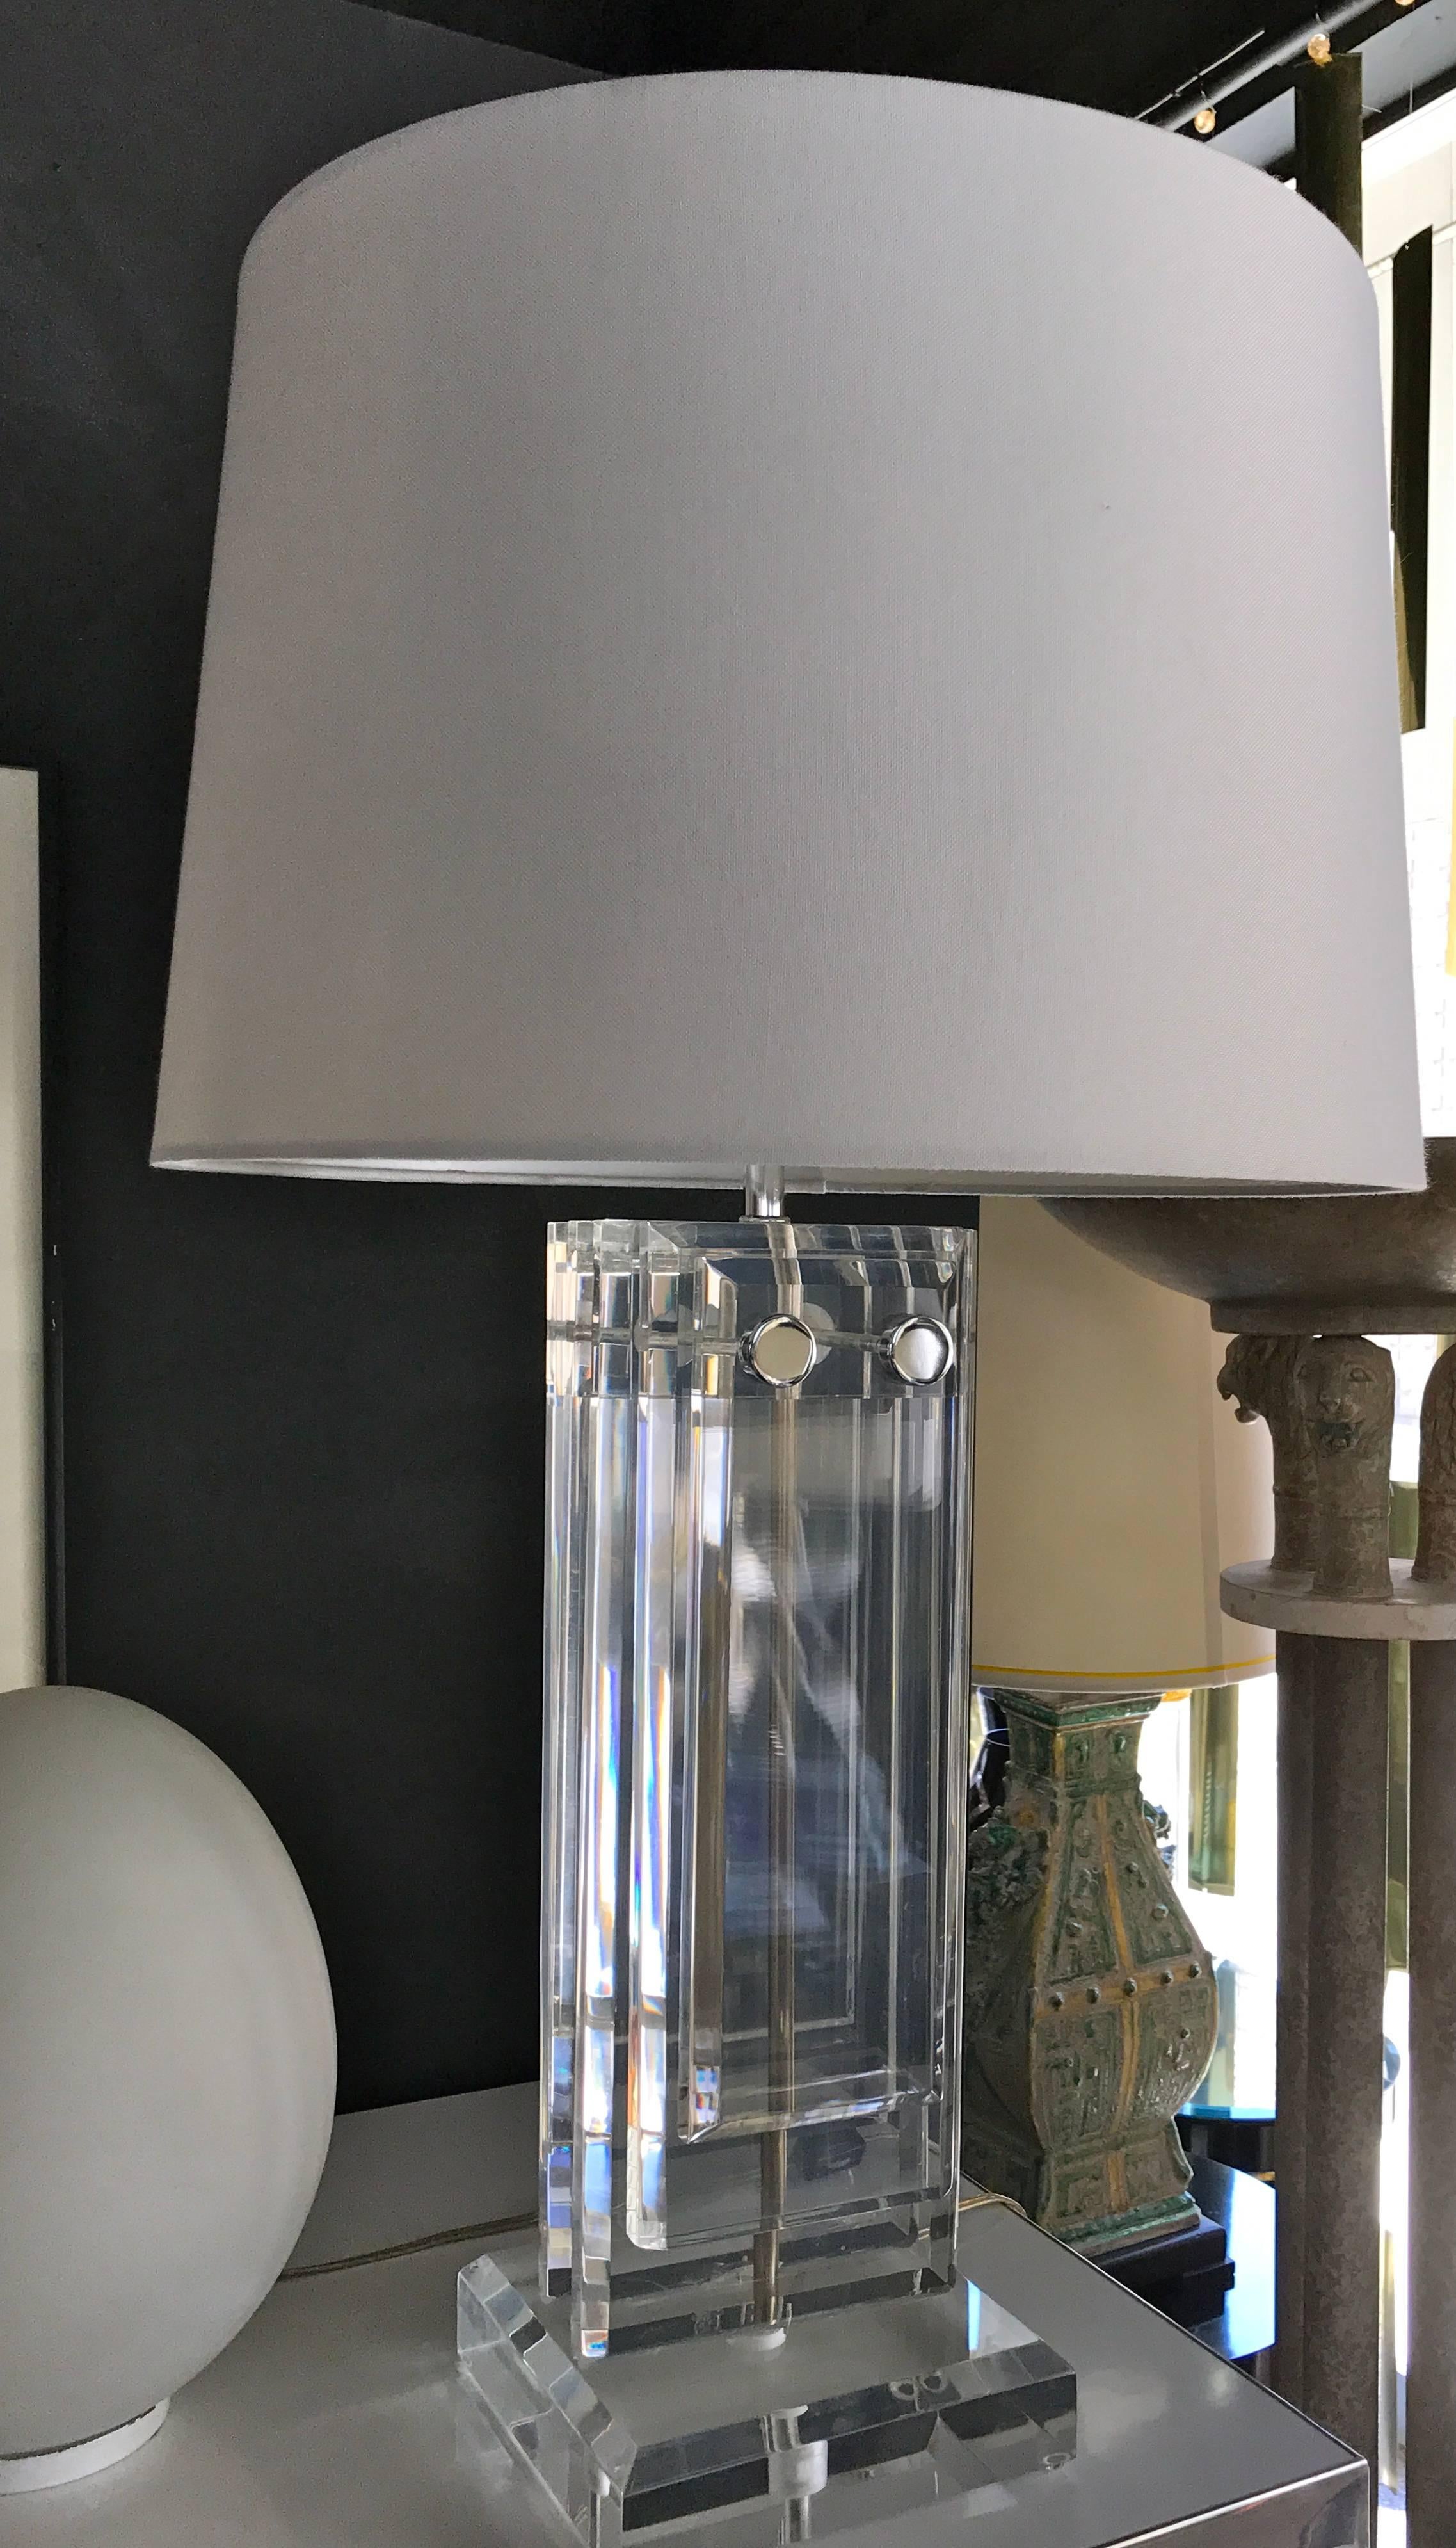 In the style of Pierre Cardin, a really special Lucite lamp from the 1970s. New white barrel shade. This lamp is heavy and made of thick solid slabs of Lucite. Lucite finial included. Chrome accent trim. From a very upscale and architecturally